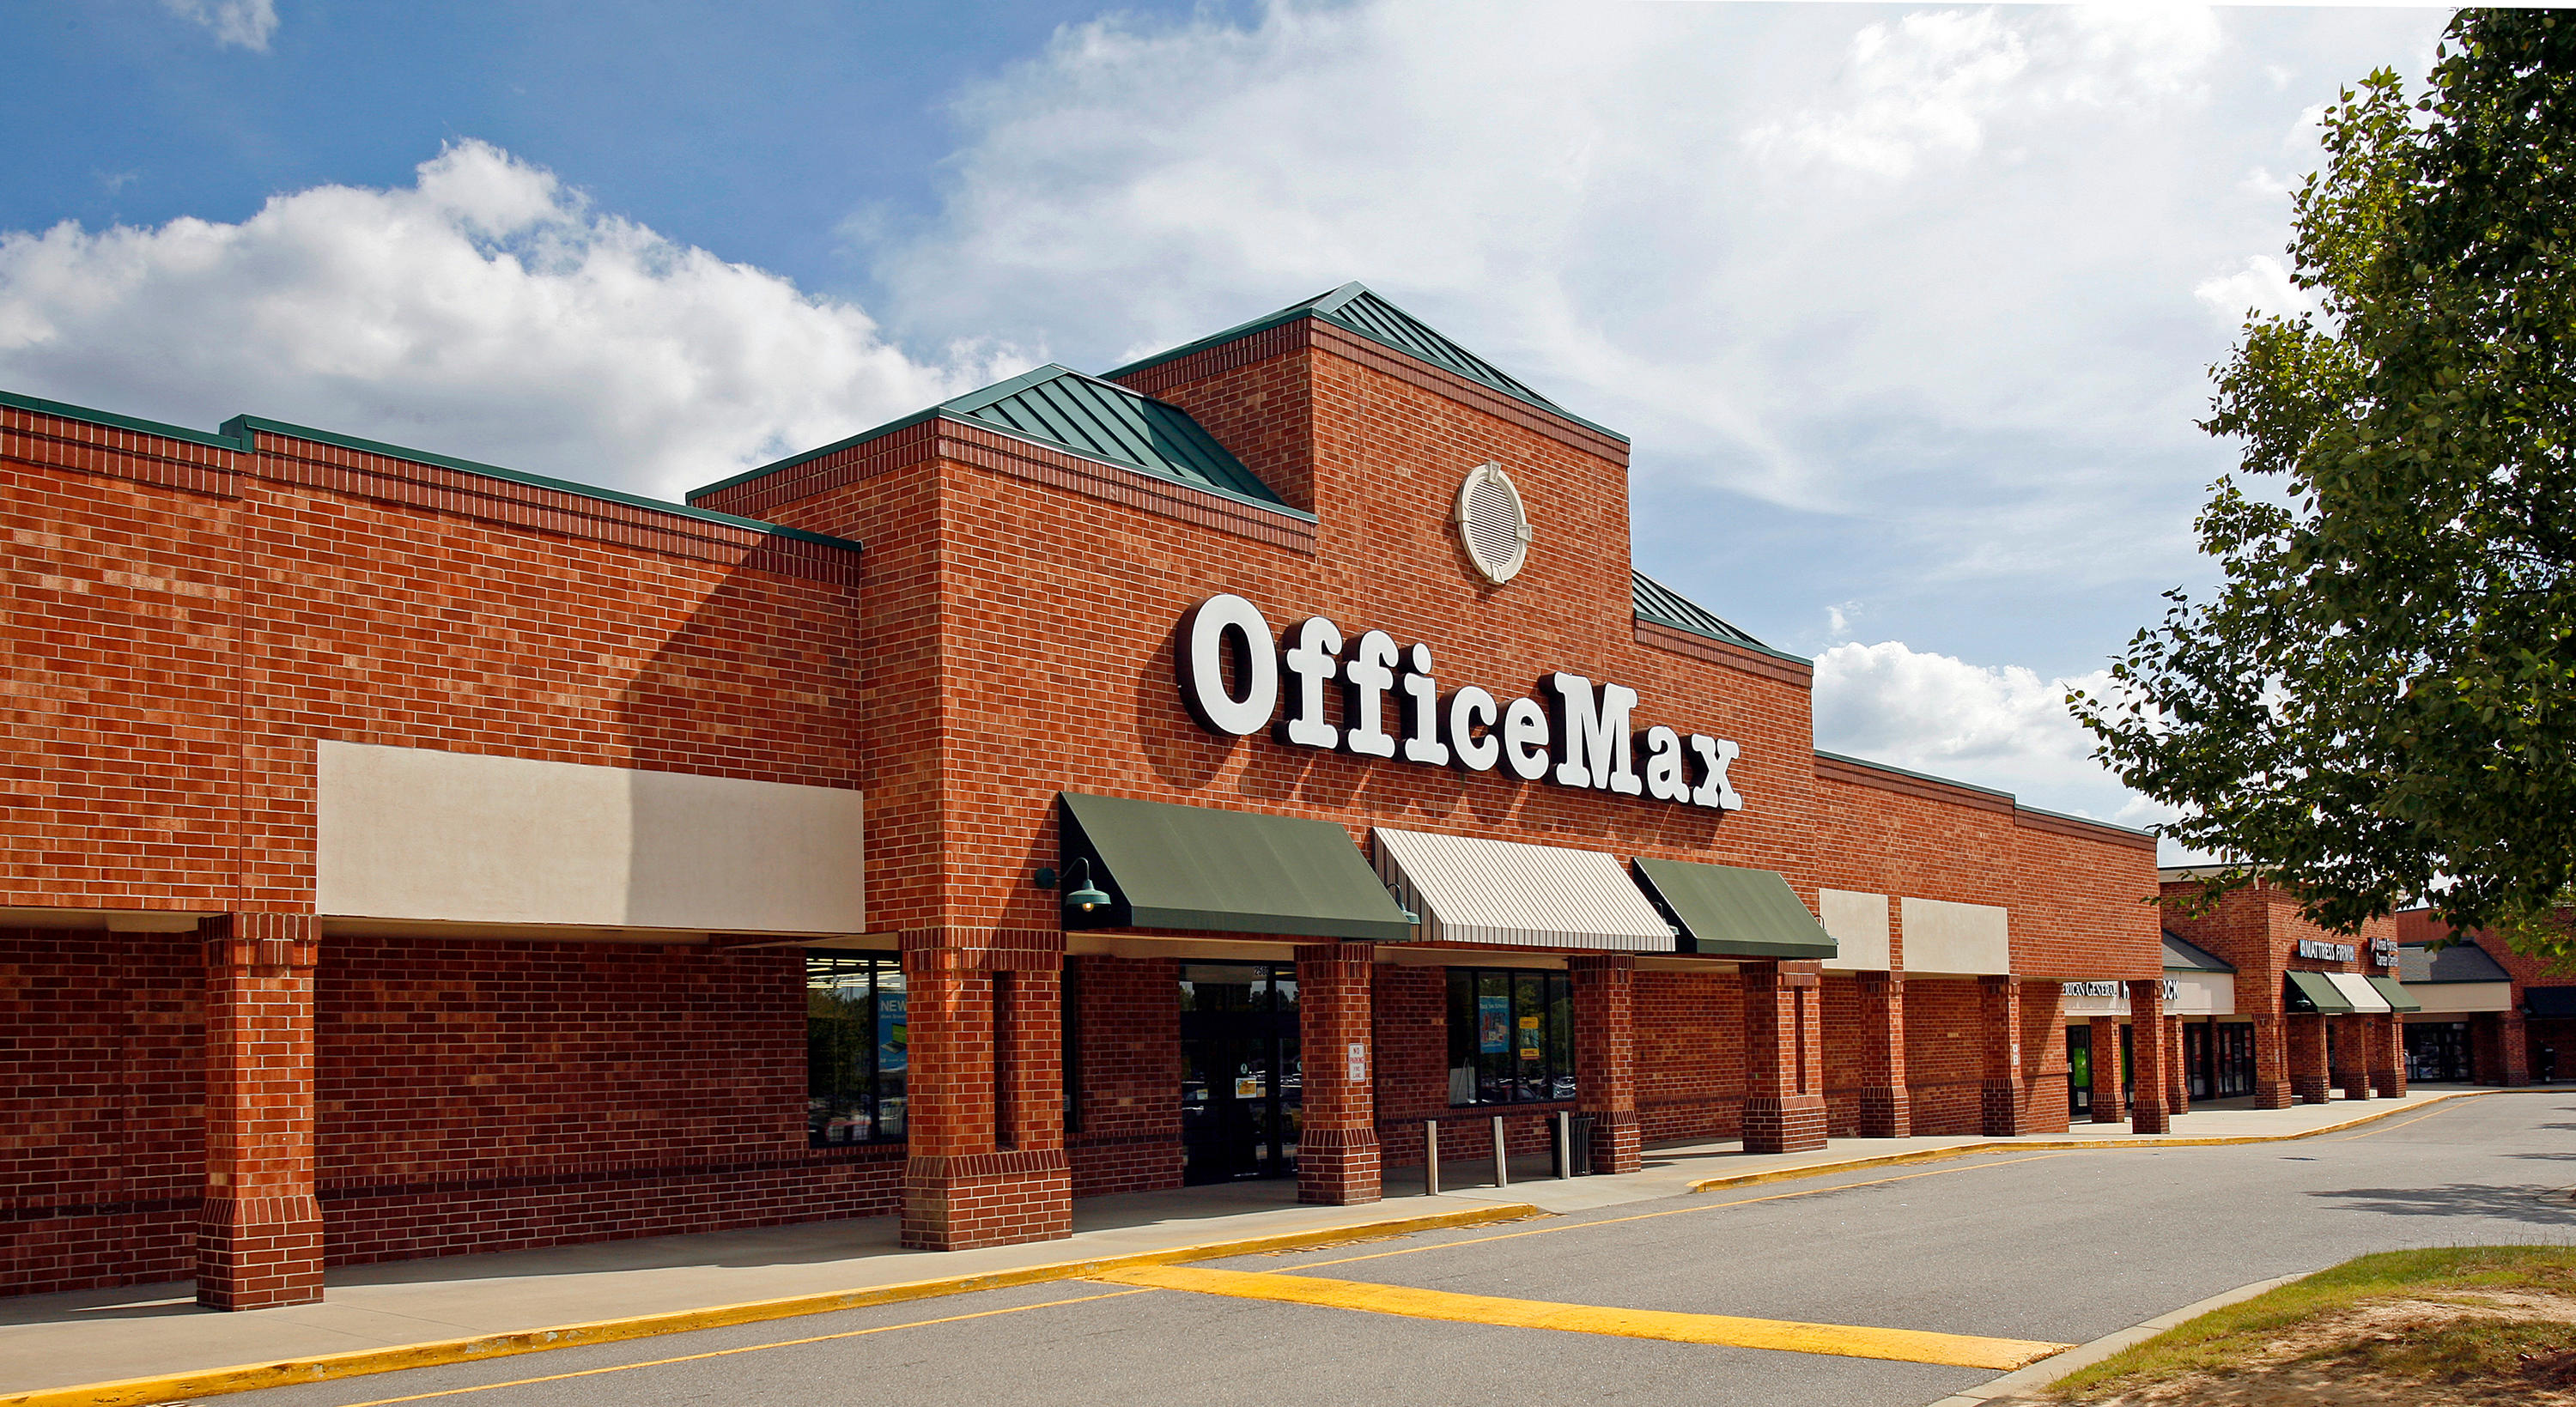 Office Max at Garner Towne Square Shopping Center